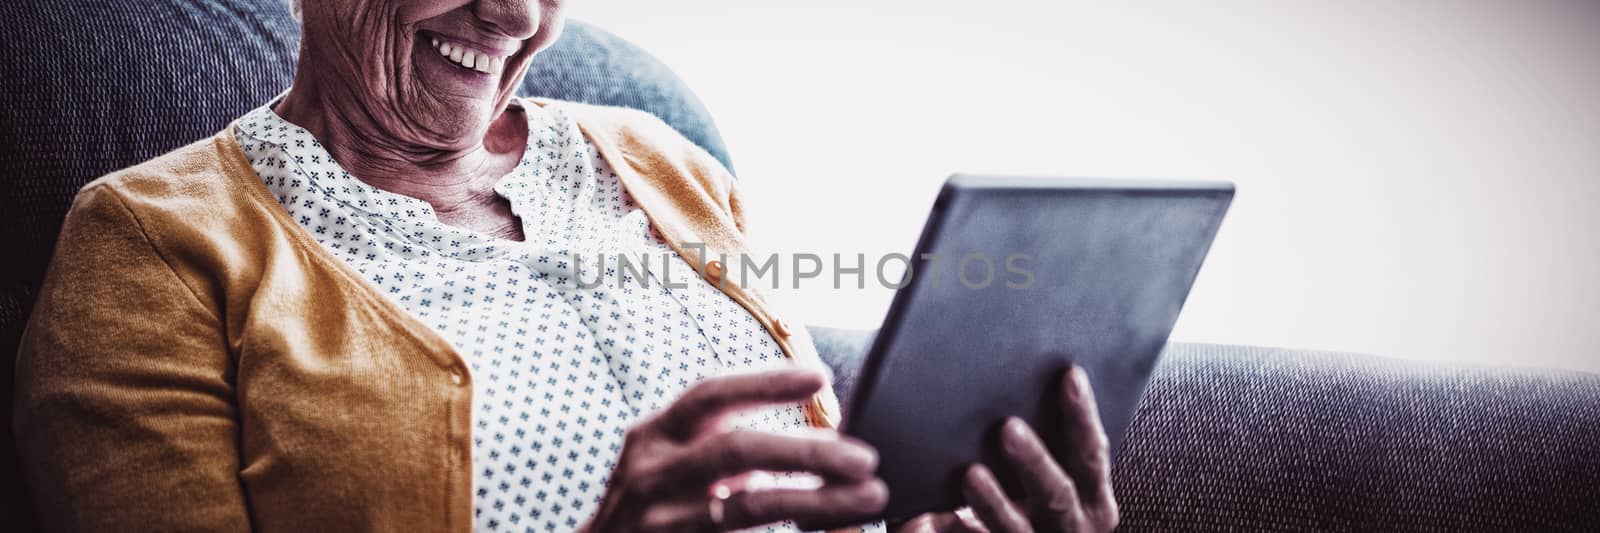 Smiling senior woman looking and laughing at her digital tablet by Wavebreakmedia